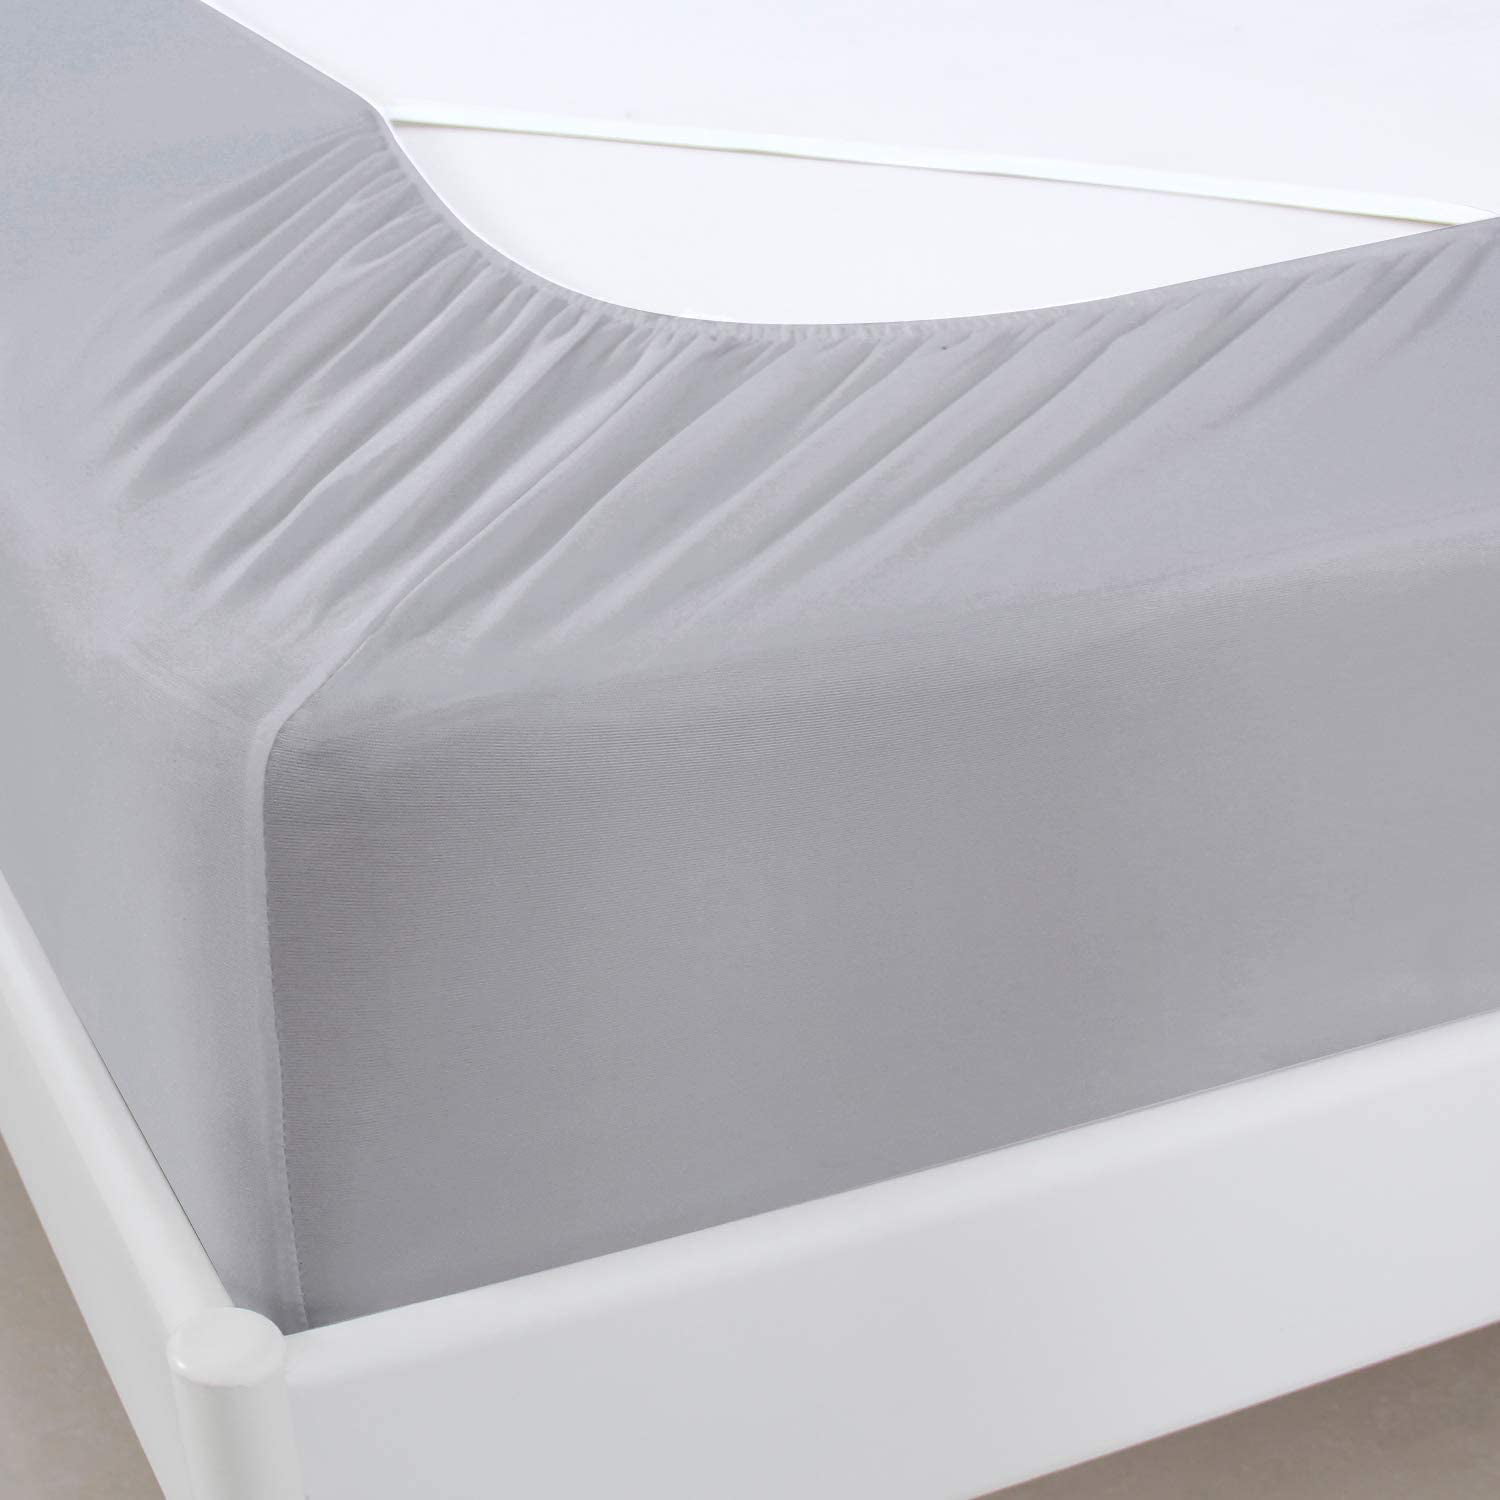 Sleek Box Spring Cover King Size Elastic Fabric Wrap Around 4 Sides Bed Skirt 